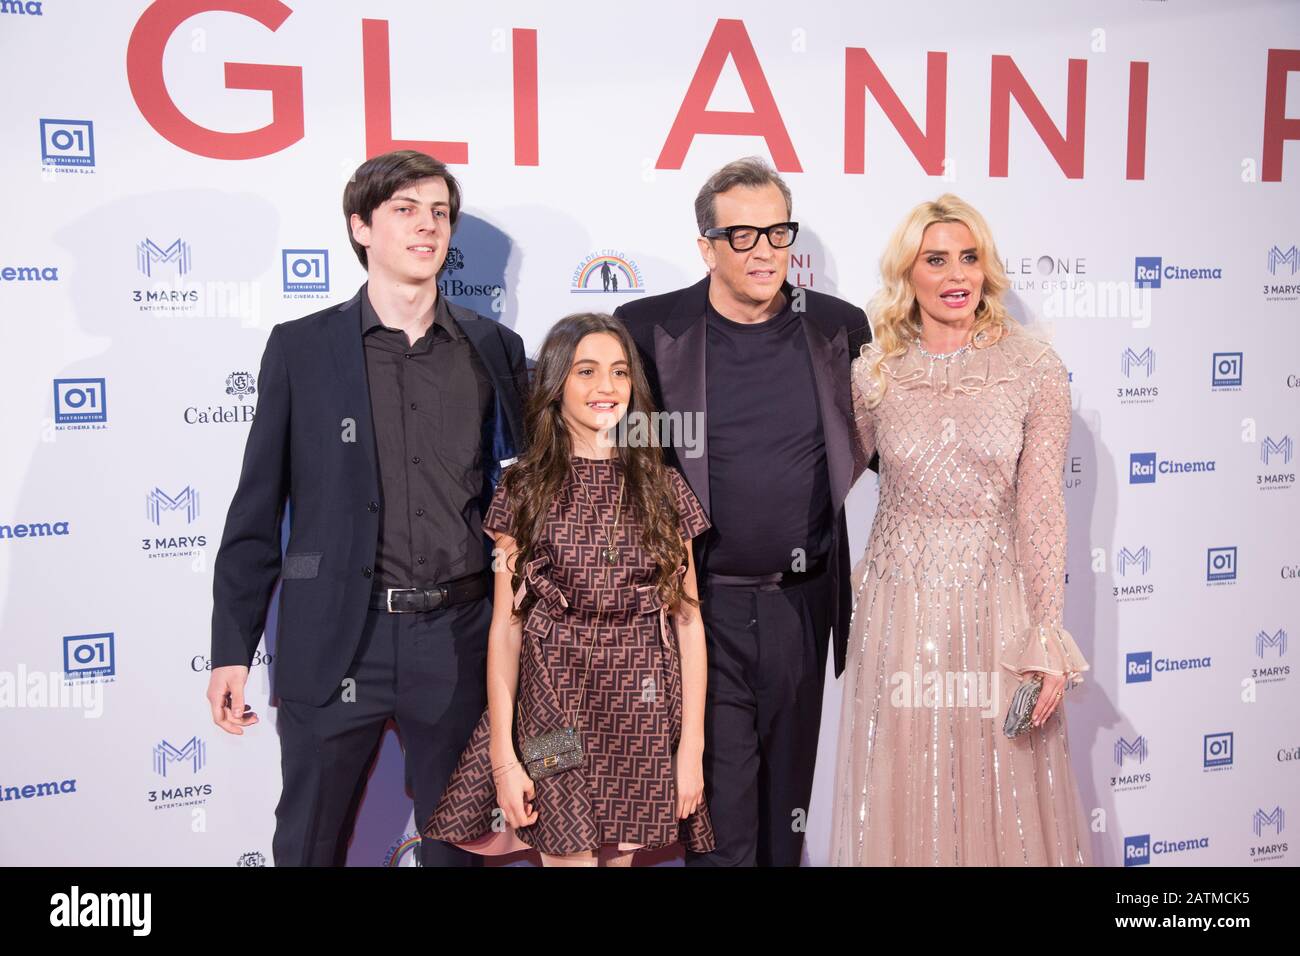 Roma, Italy. 03rd Feb, 2020. Gabriele Muccino and his wife Angelica Russo  and his son and daughter Penelope Red Carpet for the premiere of the Italian  film "Gli Anni Più Belli" at